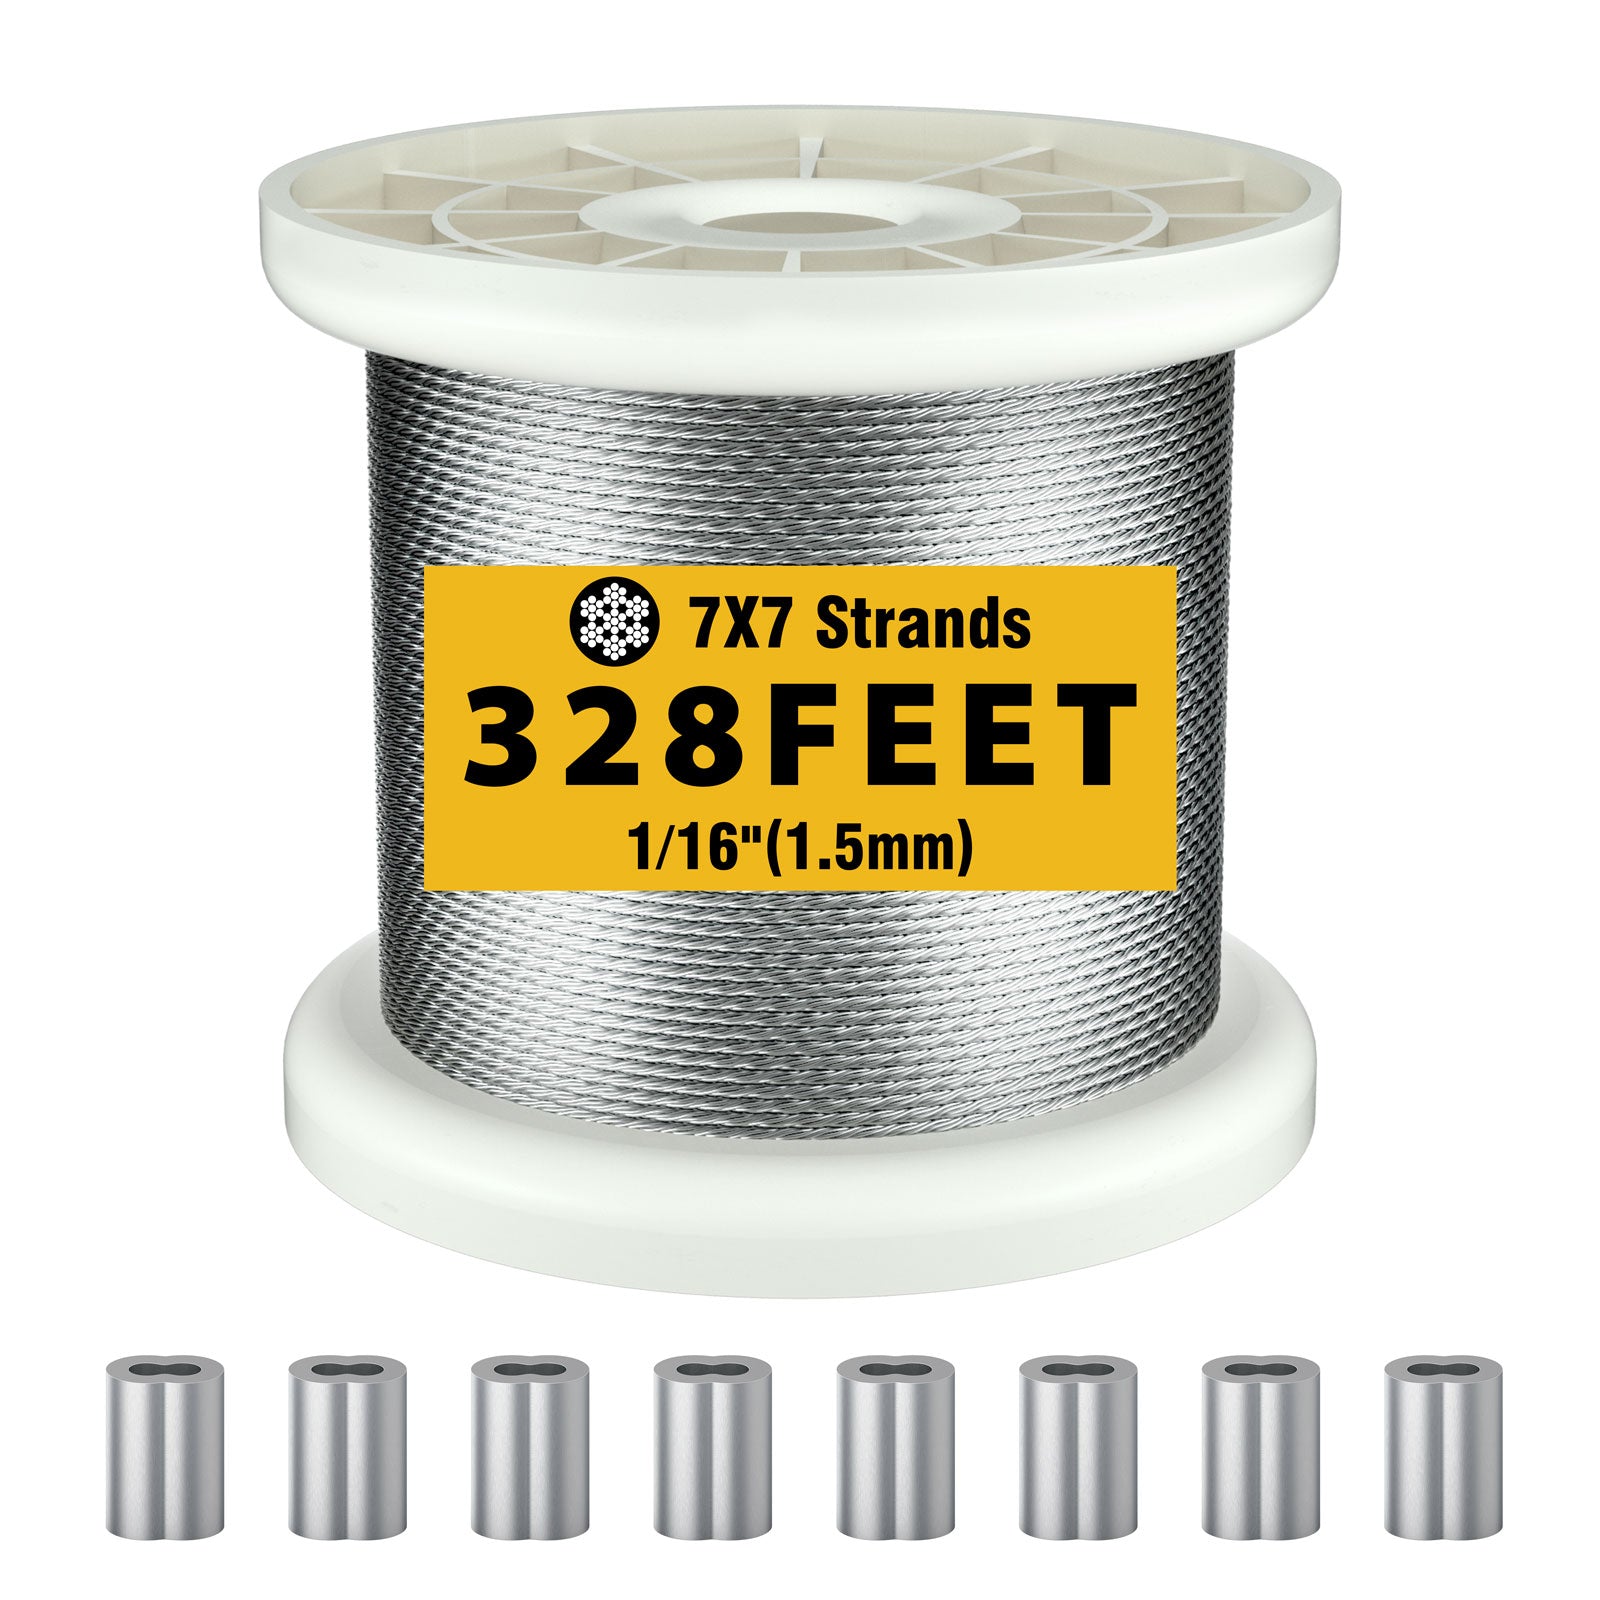 REKOBON Wire Rope 1/16 Wire Rope Stainless Steel 304 Wire Cable 328ft Length Aircraft Cable with 100pcs Sleeves Stops 7x7 Strand Core 368 lbs Breaking